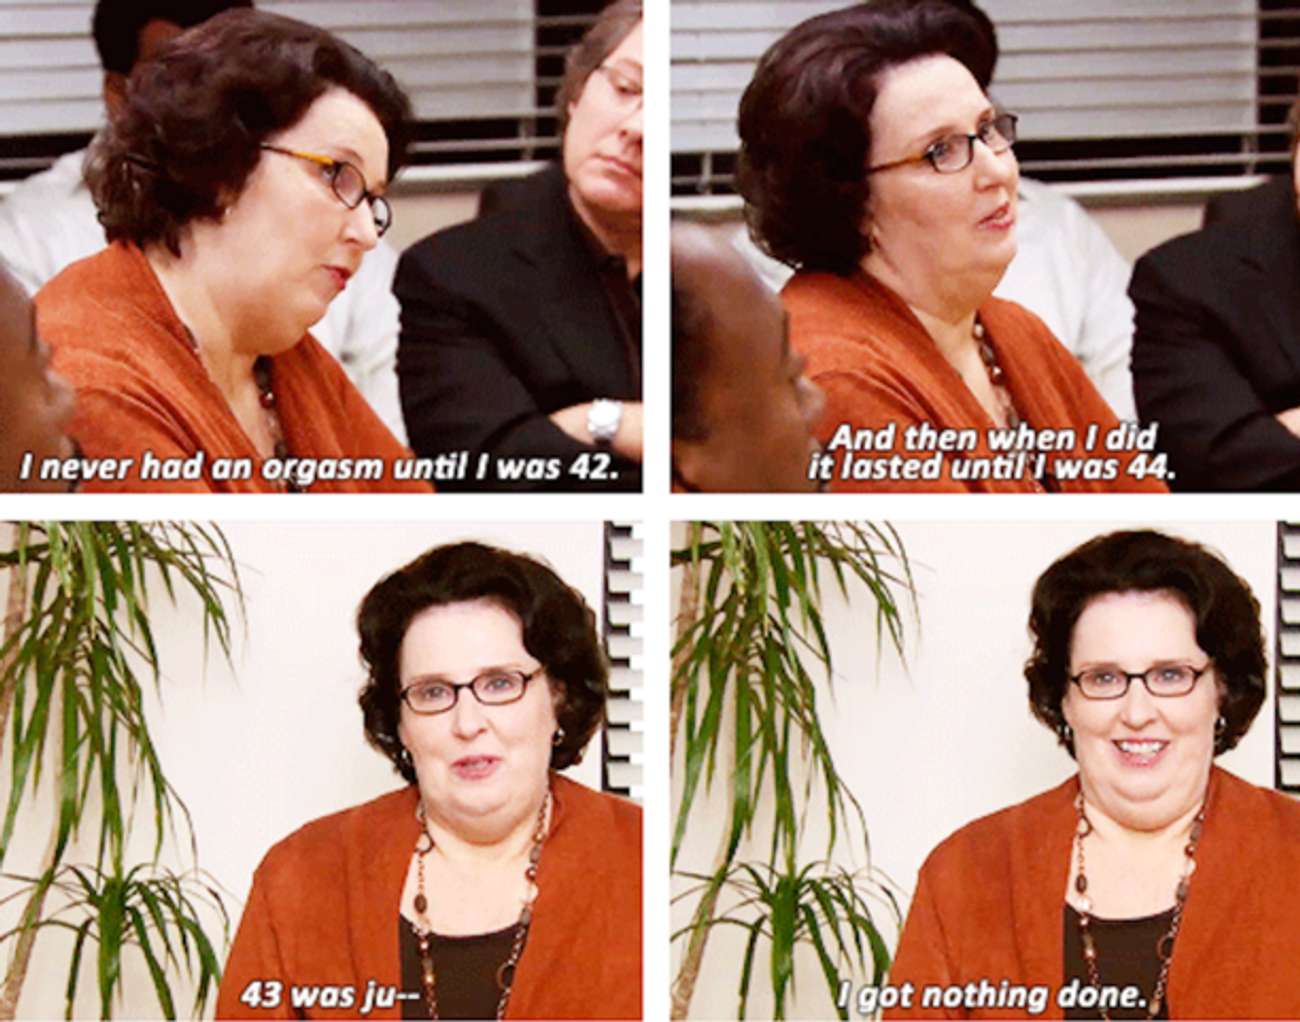 office phyllis quotes - I never had an orgasm until I was 42. And then when I did it lasted until I was 44. 43 was ju I got nothing done.